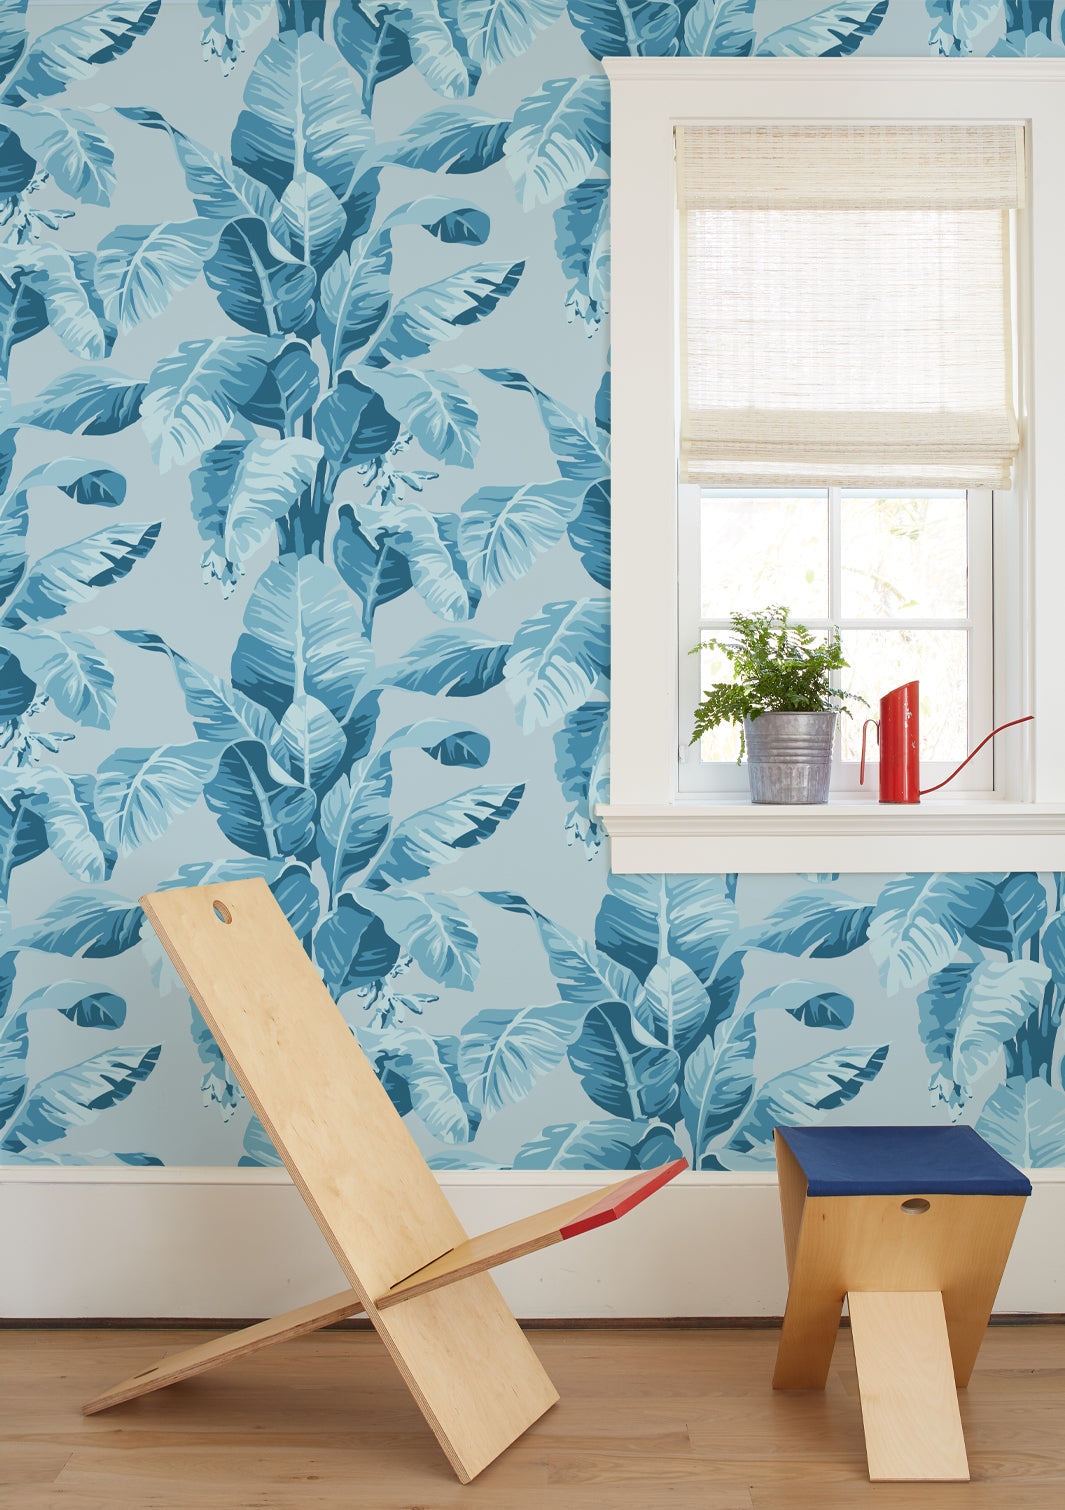 'Pacifico Palm' Wallpaper by Nathan Turner - Powder Blue